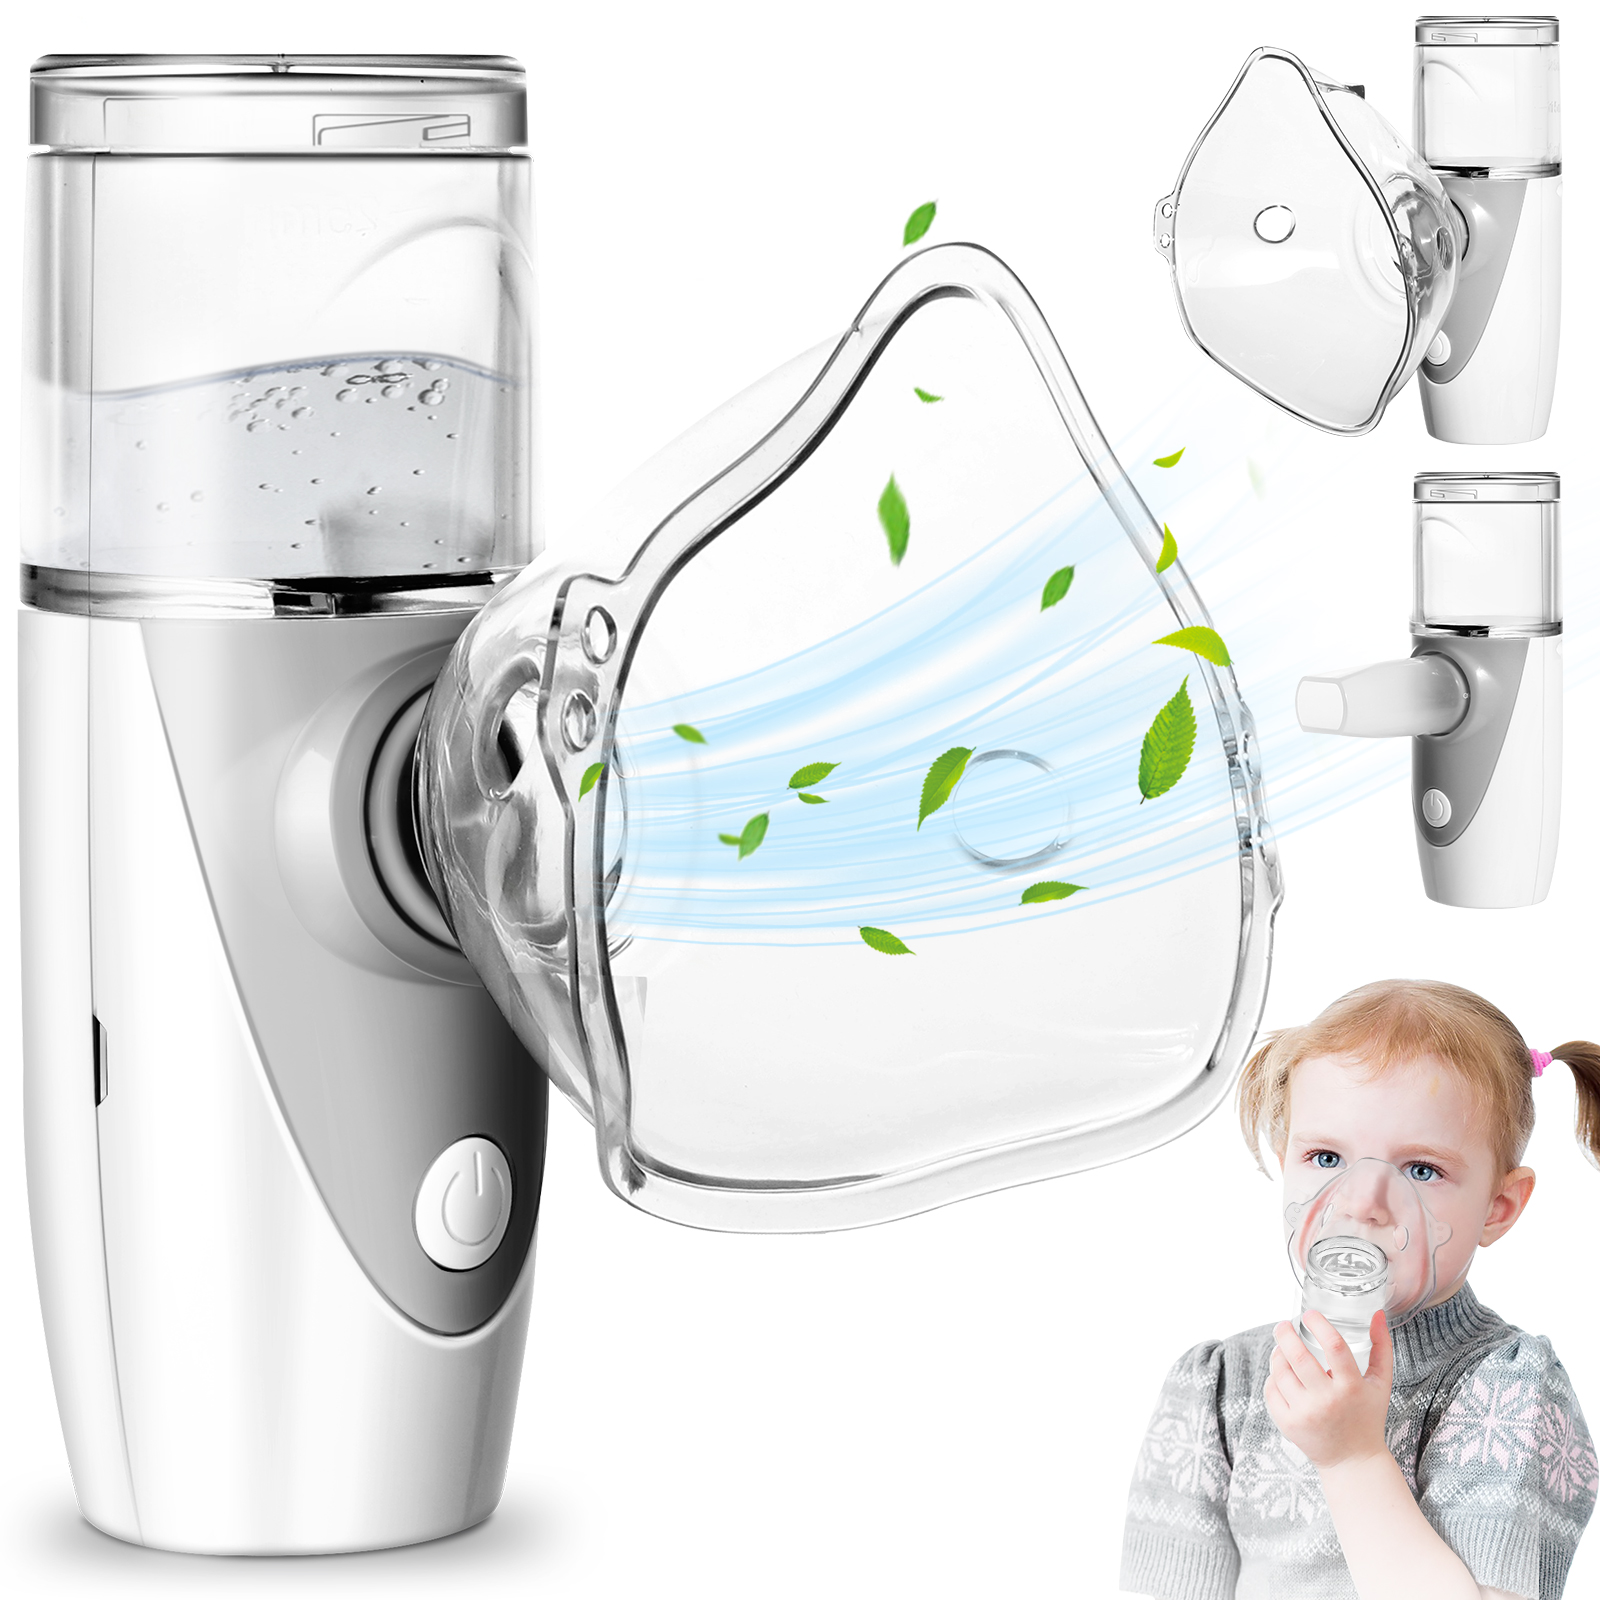 Mesh Nebulizer Medical Pediatric and Adult Portable Rechargeable Nebulizer